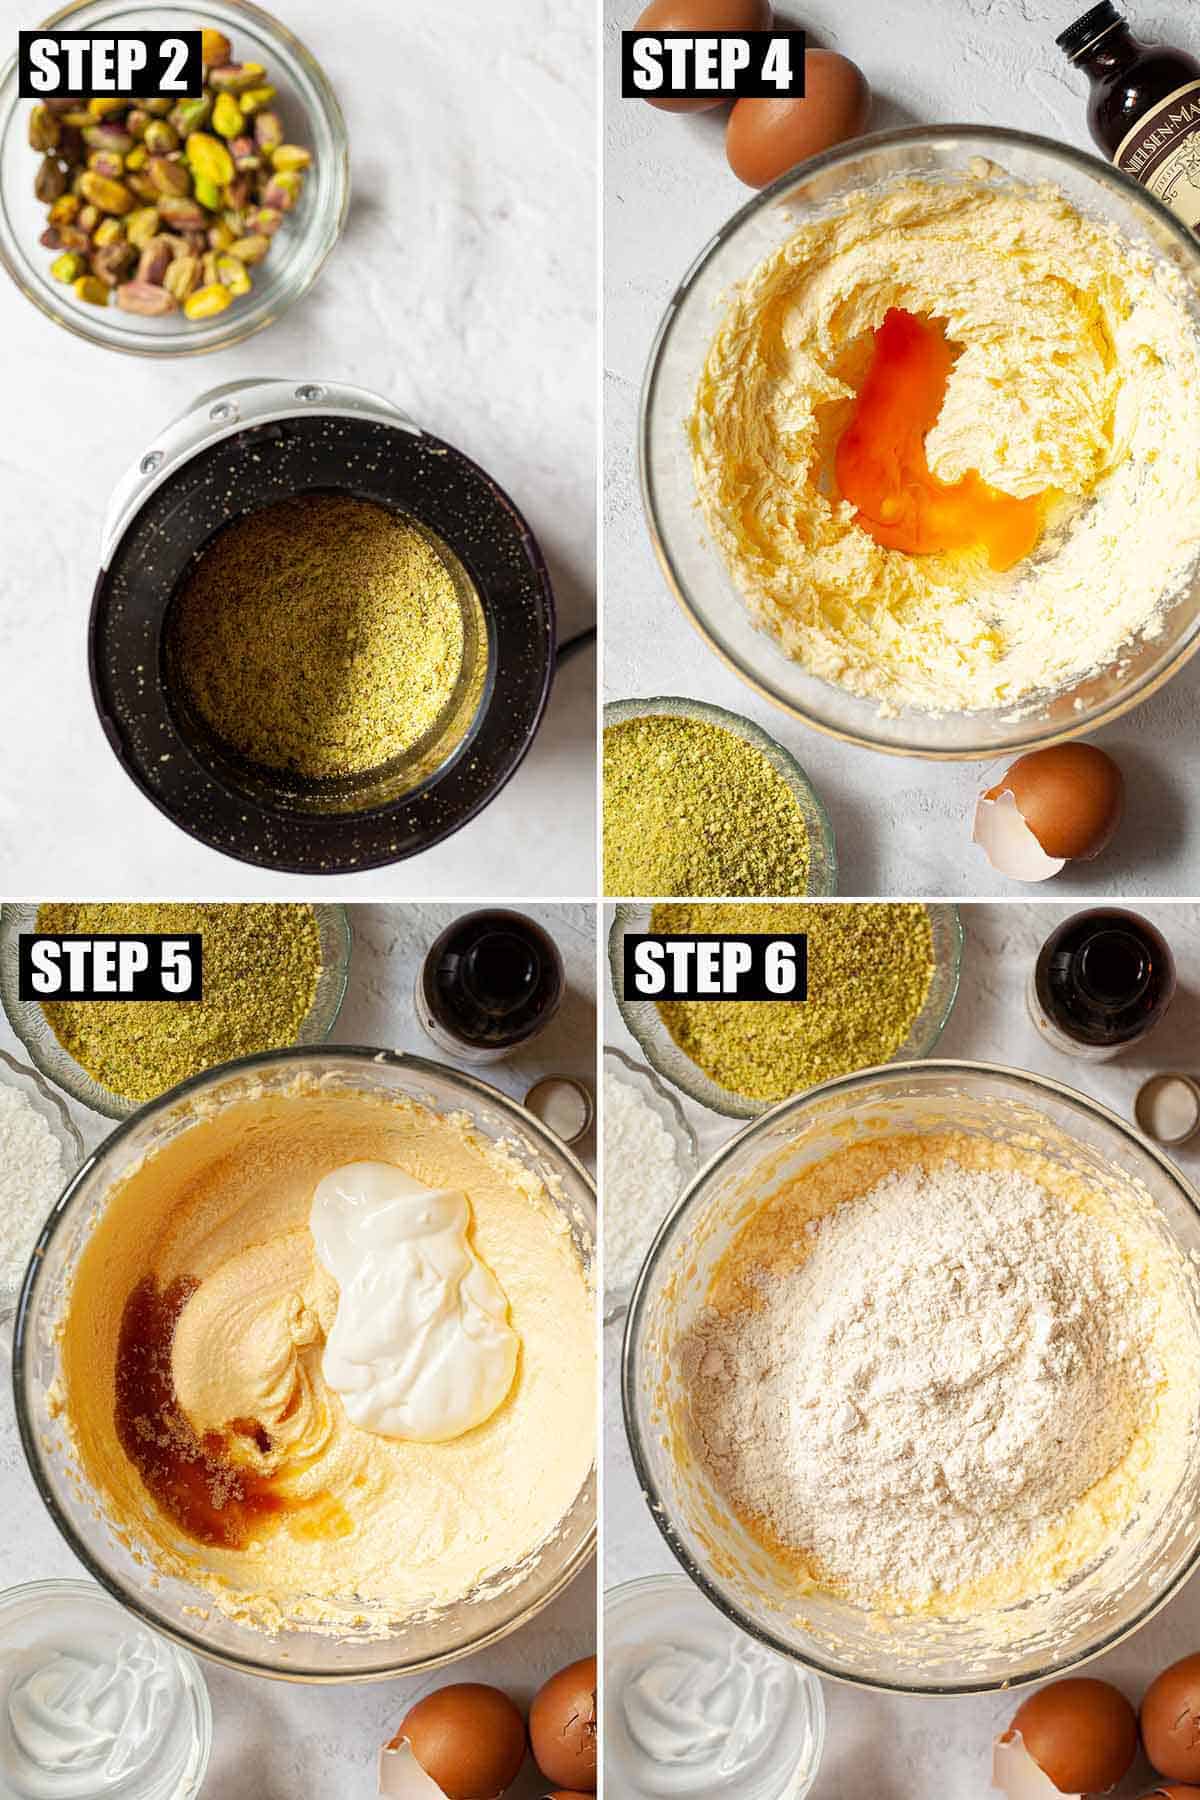 Collage of images showing sponge cake batter being made.